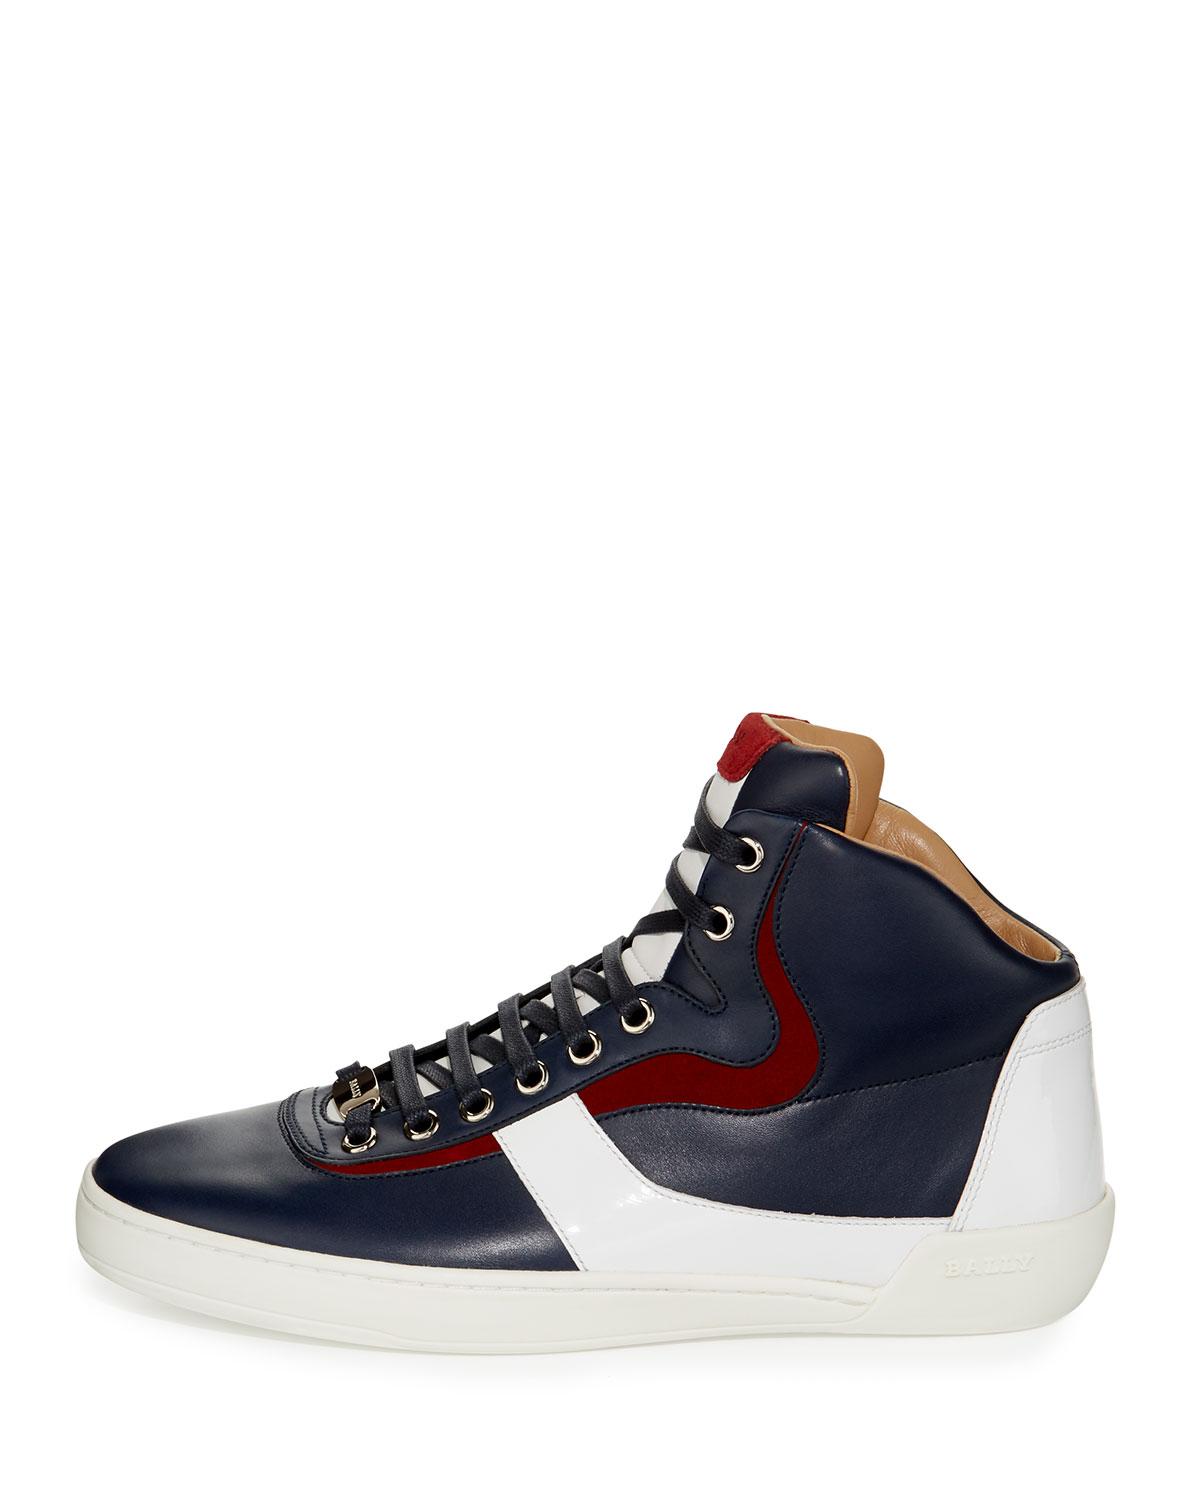 Lyst - Bally Eroy Leather High-top Sneaker in Blue for Men